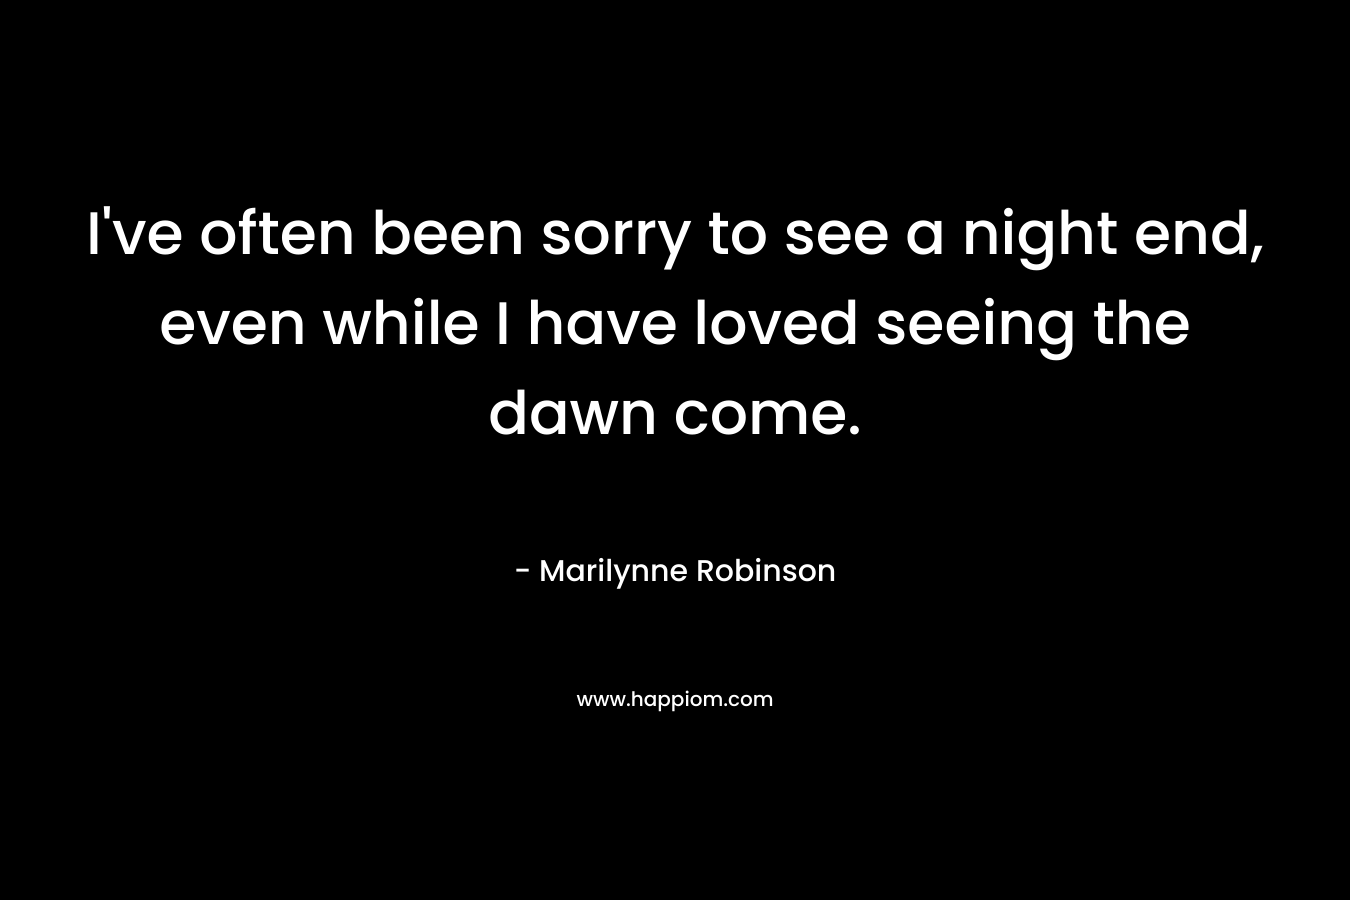 I’ve often been sorry to see a night end, even while I have loved seeing the dawn come. – Marilynne Robinson